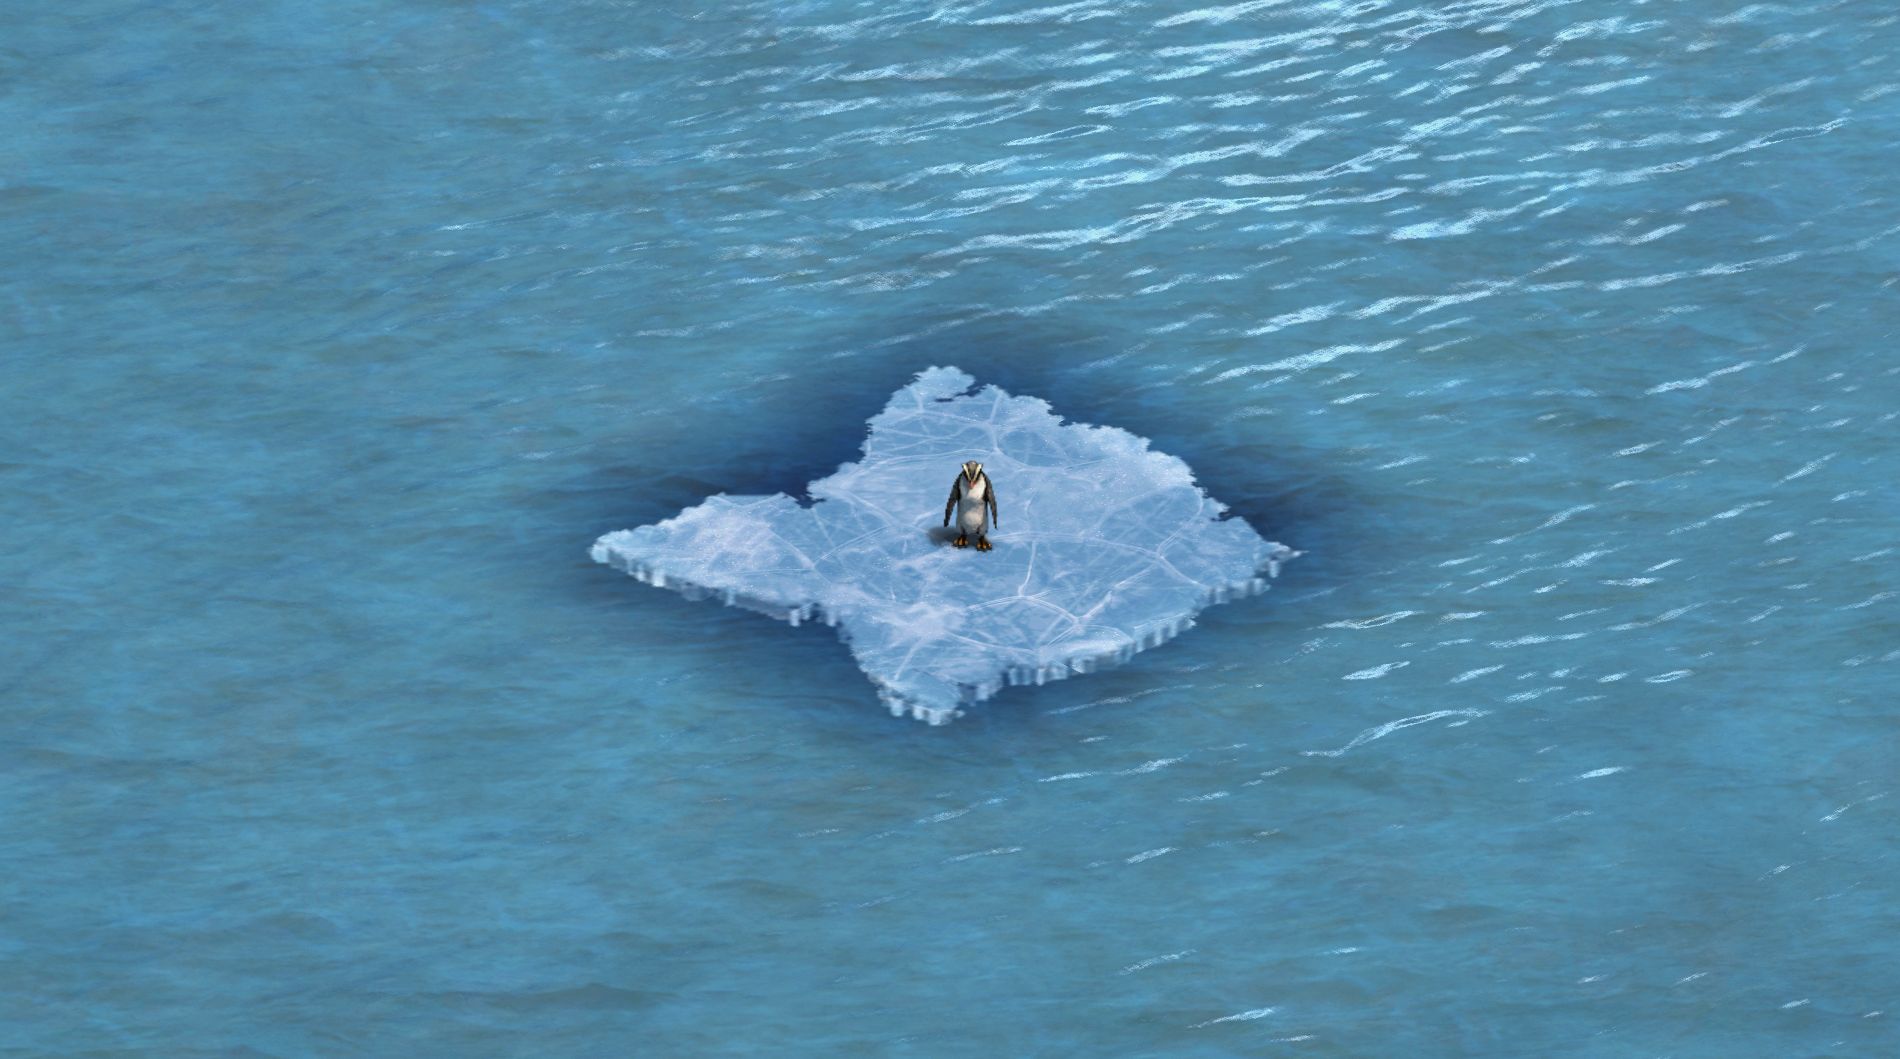 Single penguin sitting on an iceberg surrounded by water captured from Age of Empires II: Definitive Edition game engine.